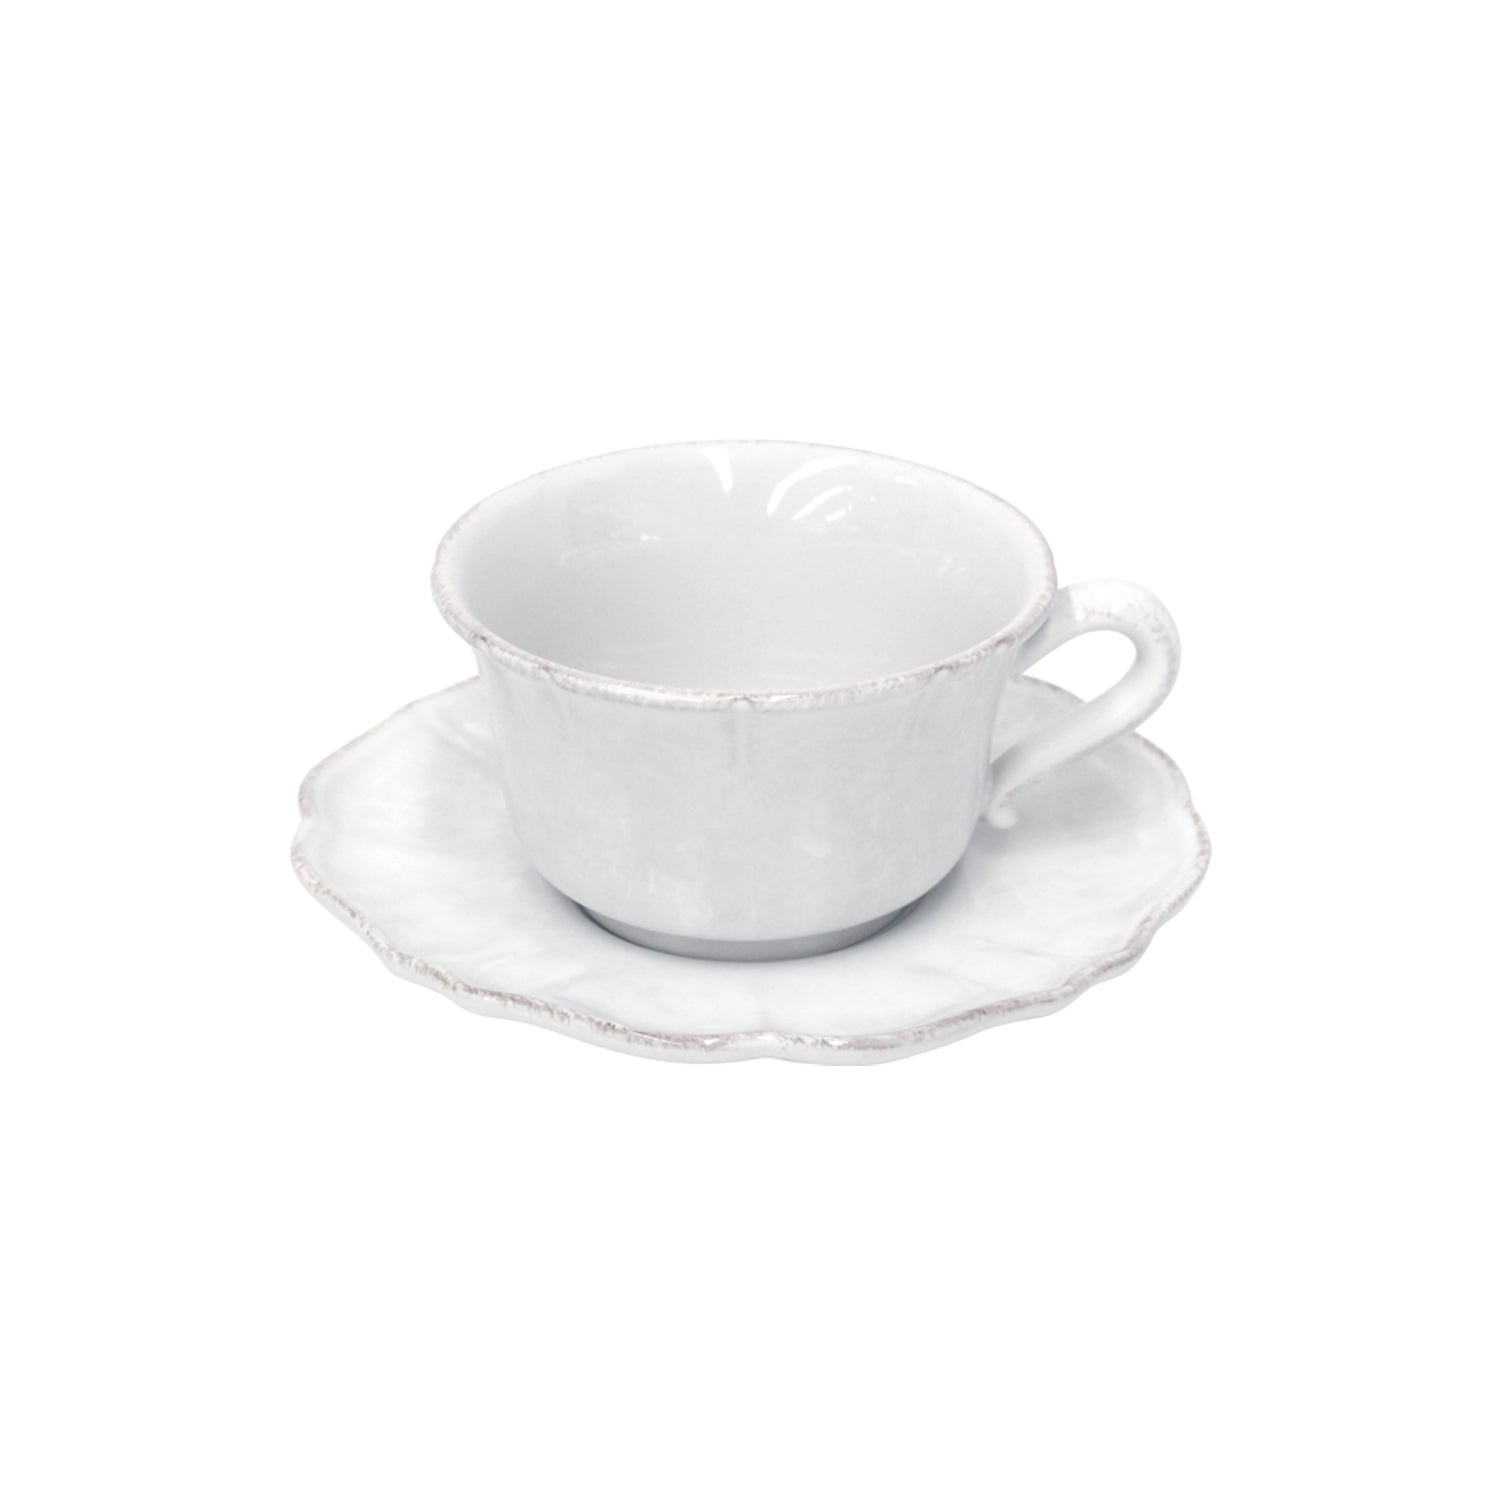 Impressions Jumbo Cup and Saucer 13 oz. White